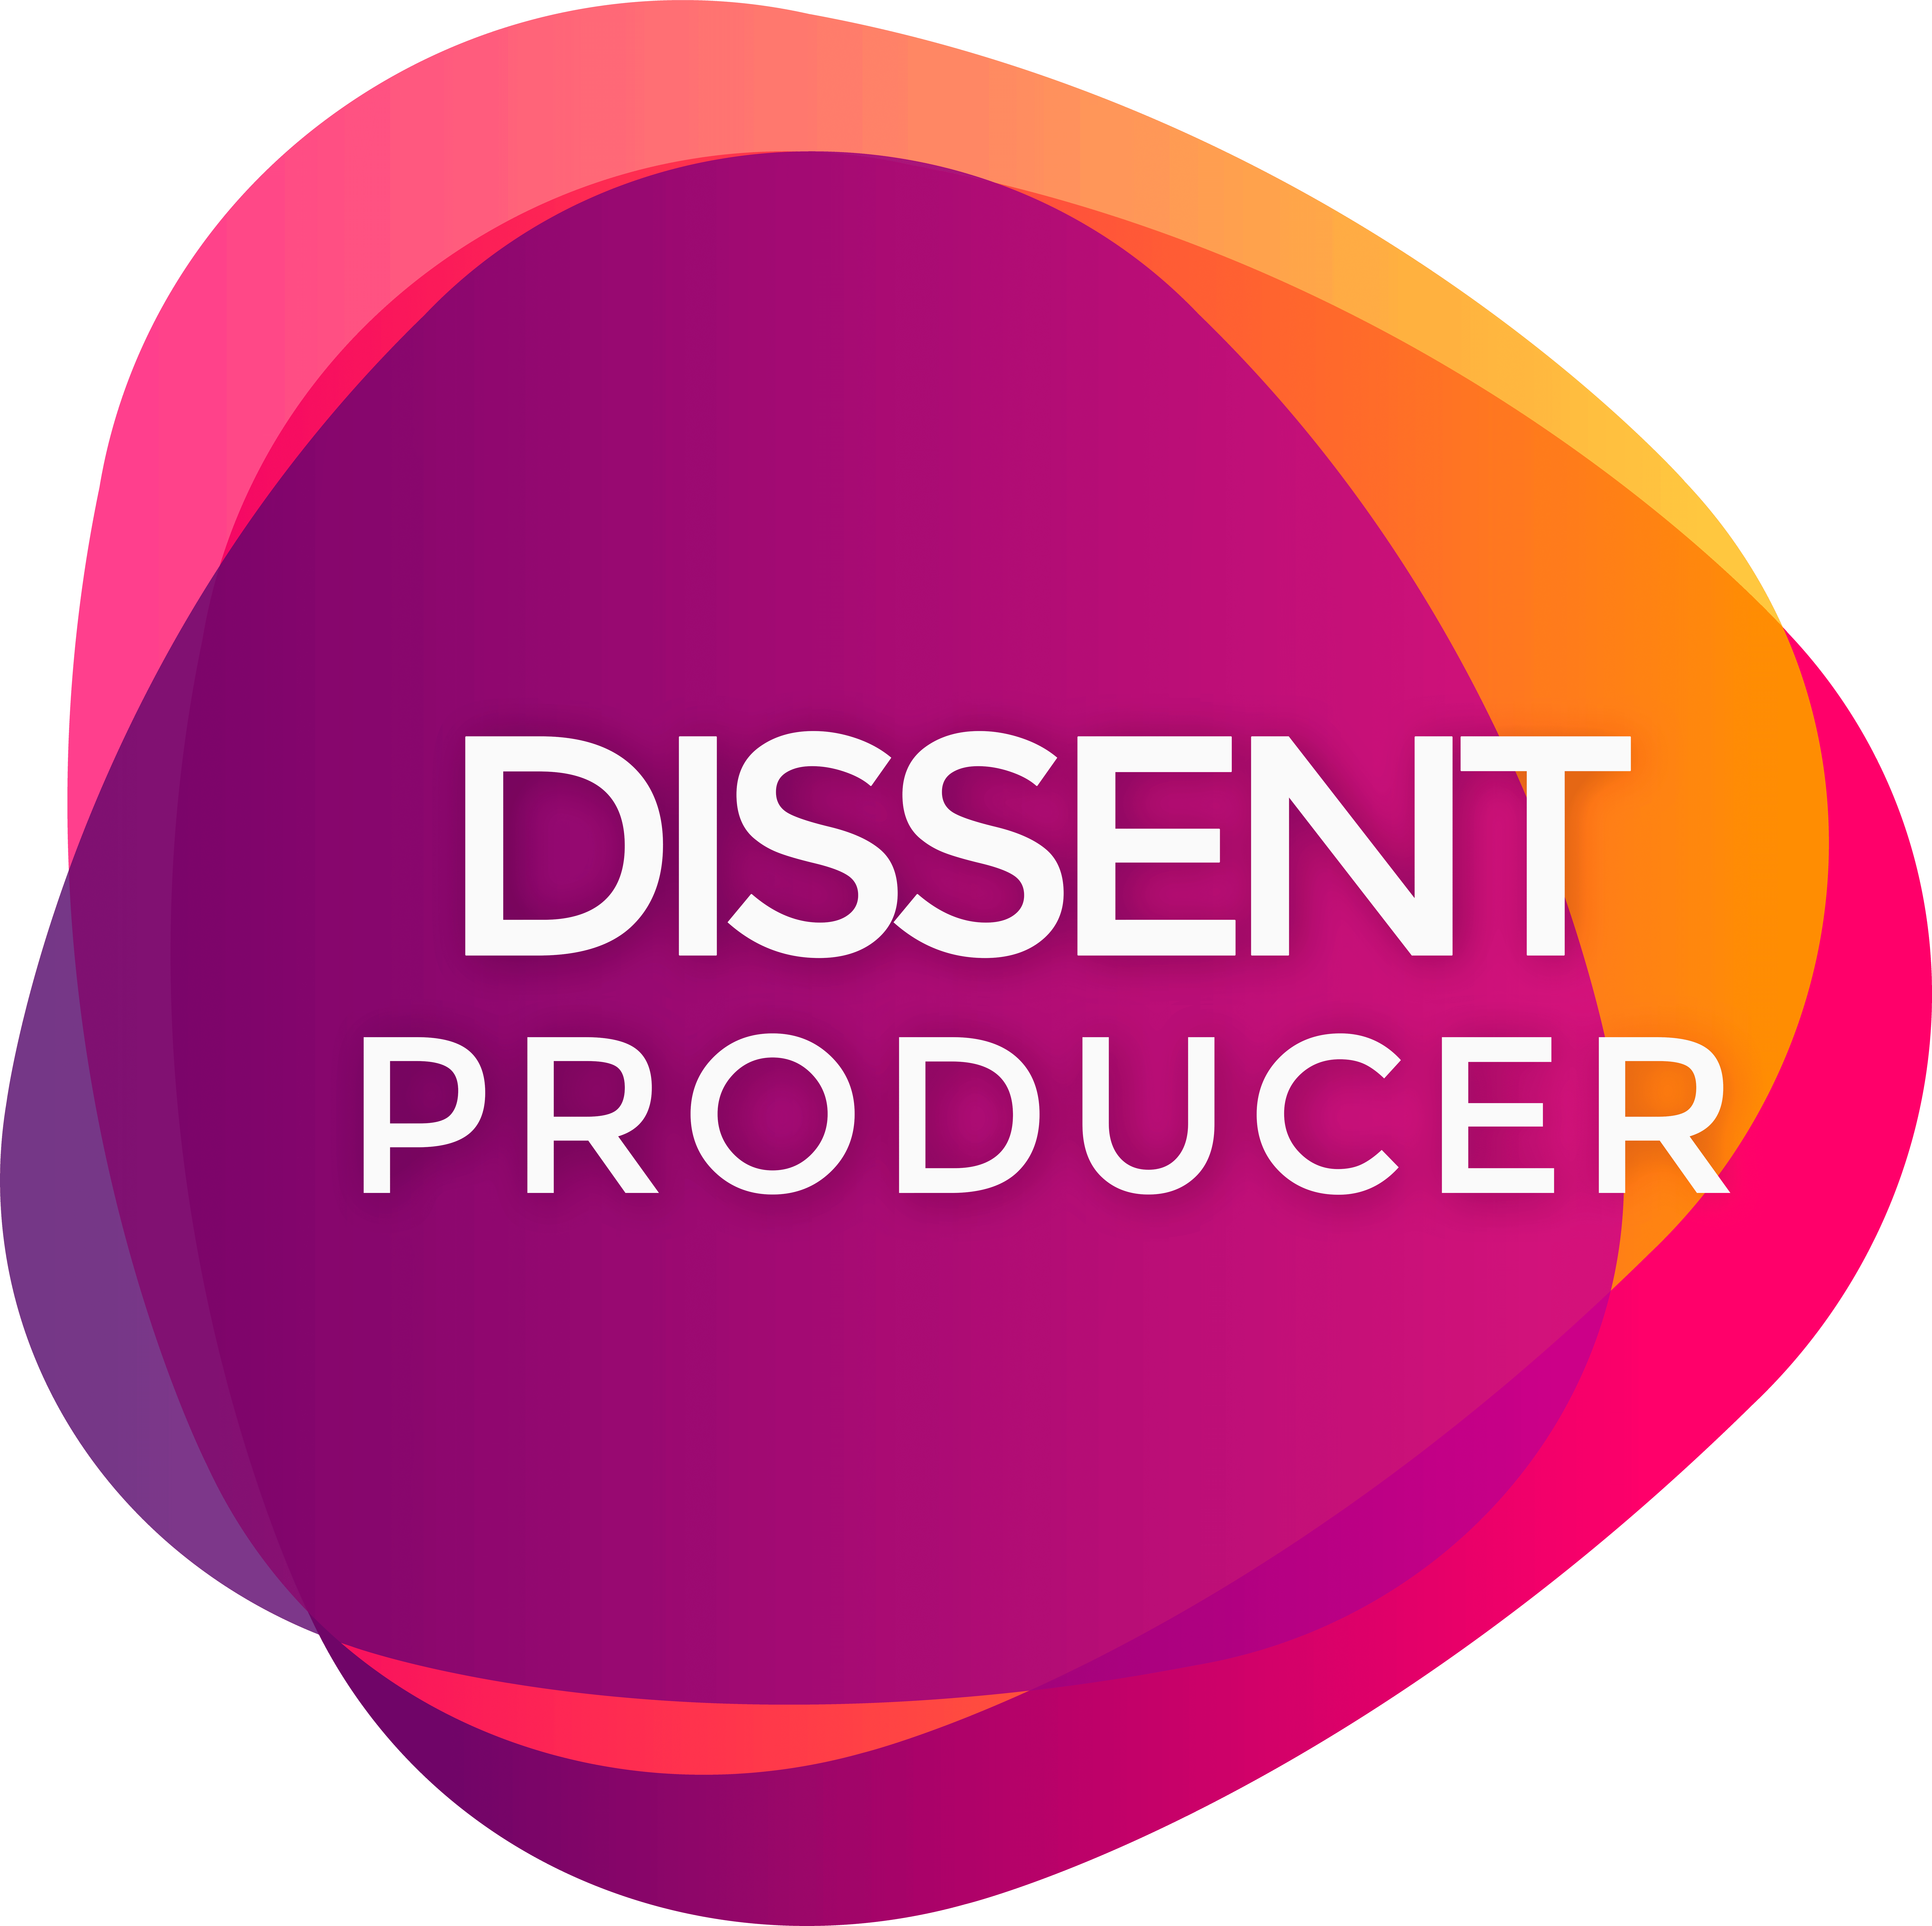 Dissent Producer